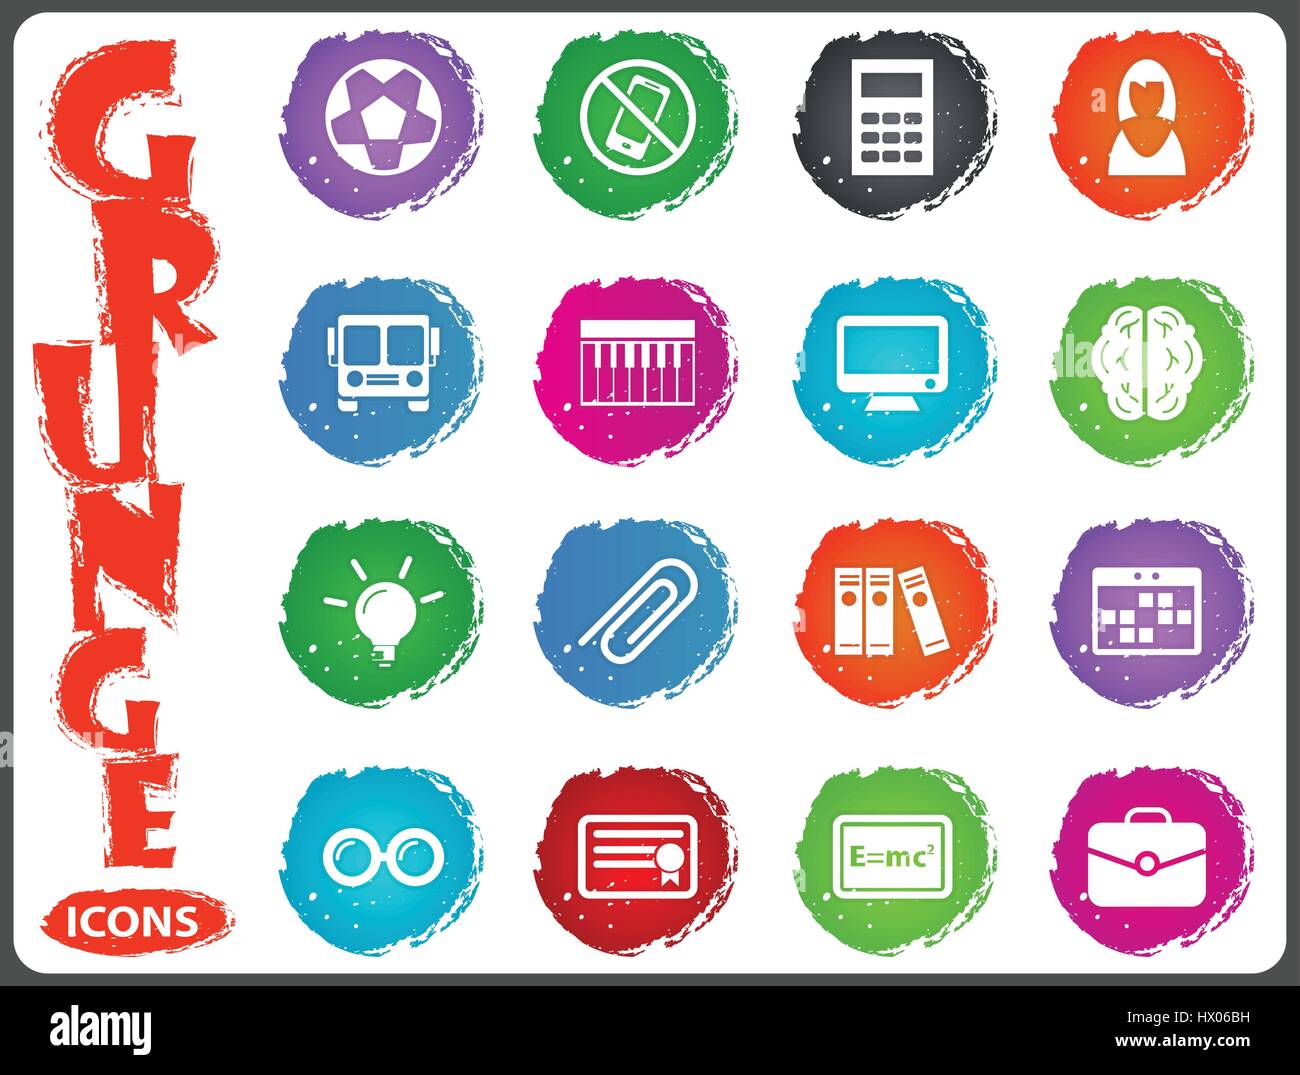 School symbol icons for user interface design in grunge style Stock Vector